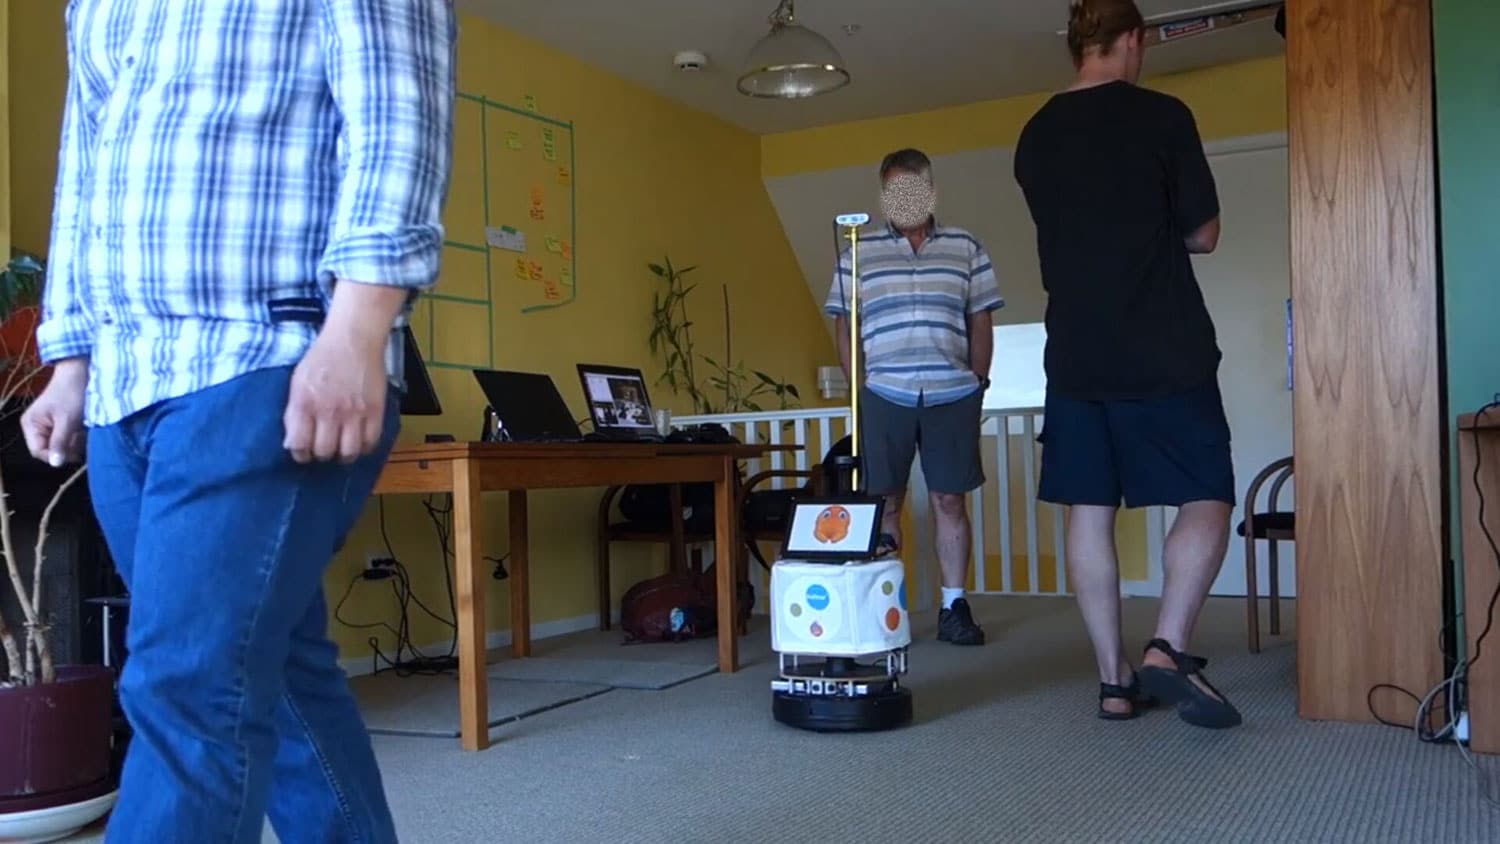 Robots were taught to track nearby person and follow them.